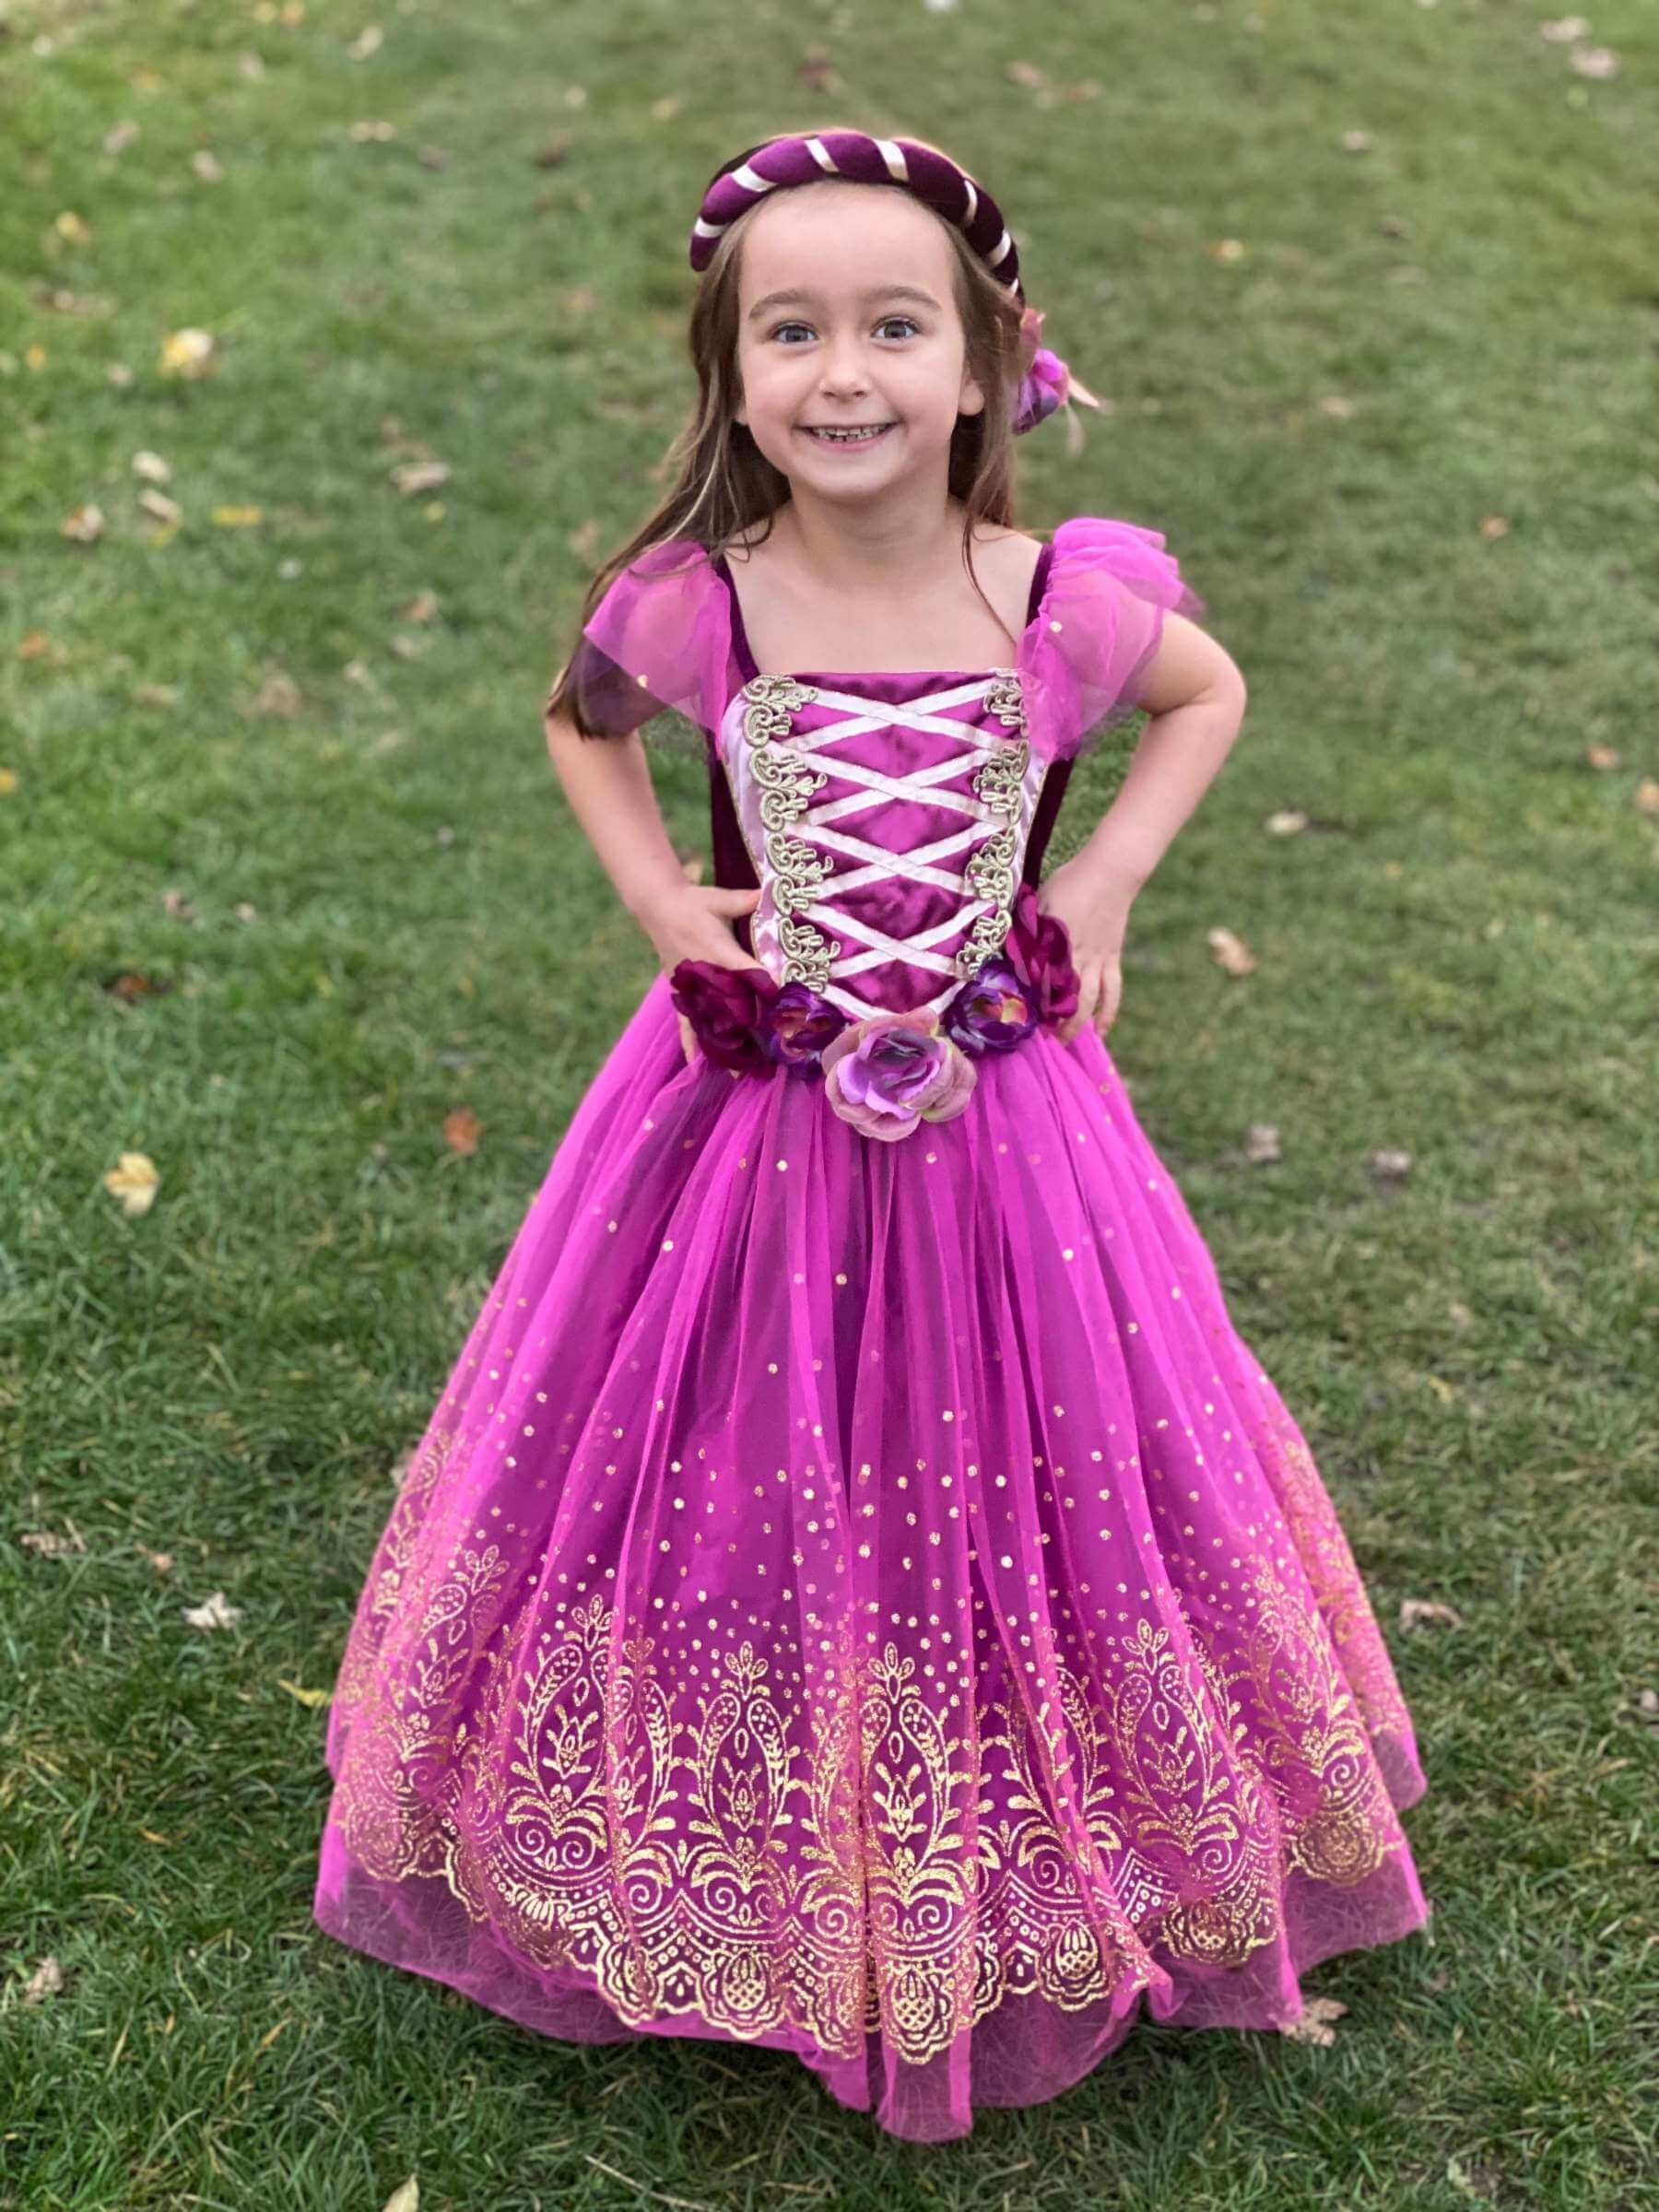 Girl stood on grass wearing the plum and gold princess dress.